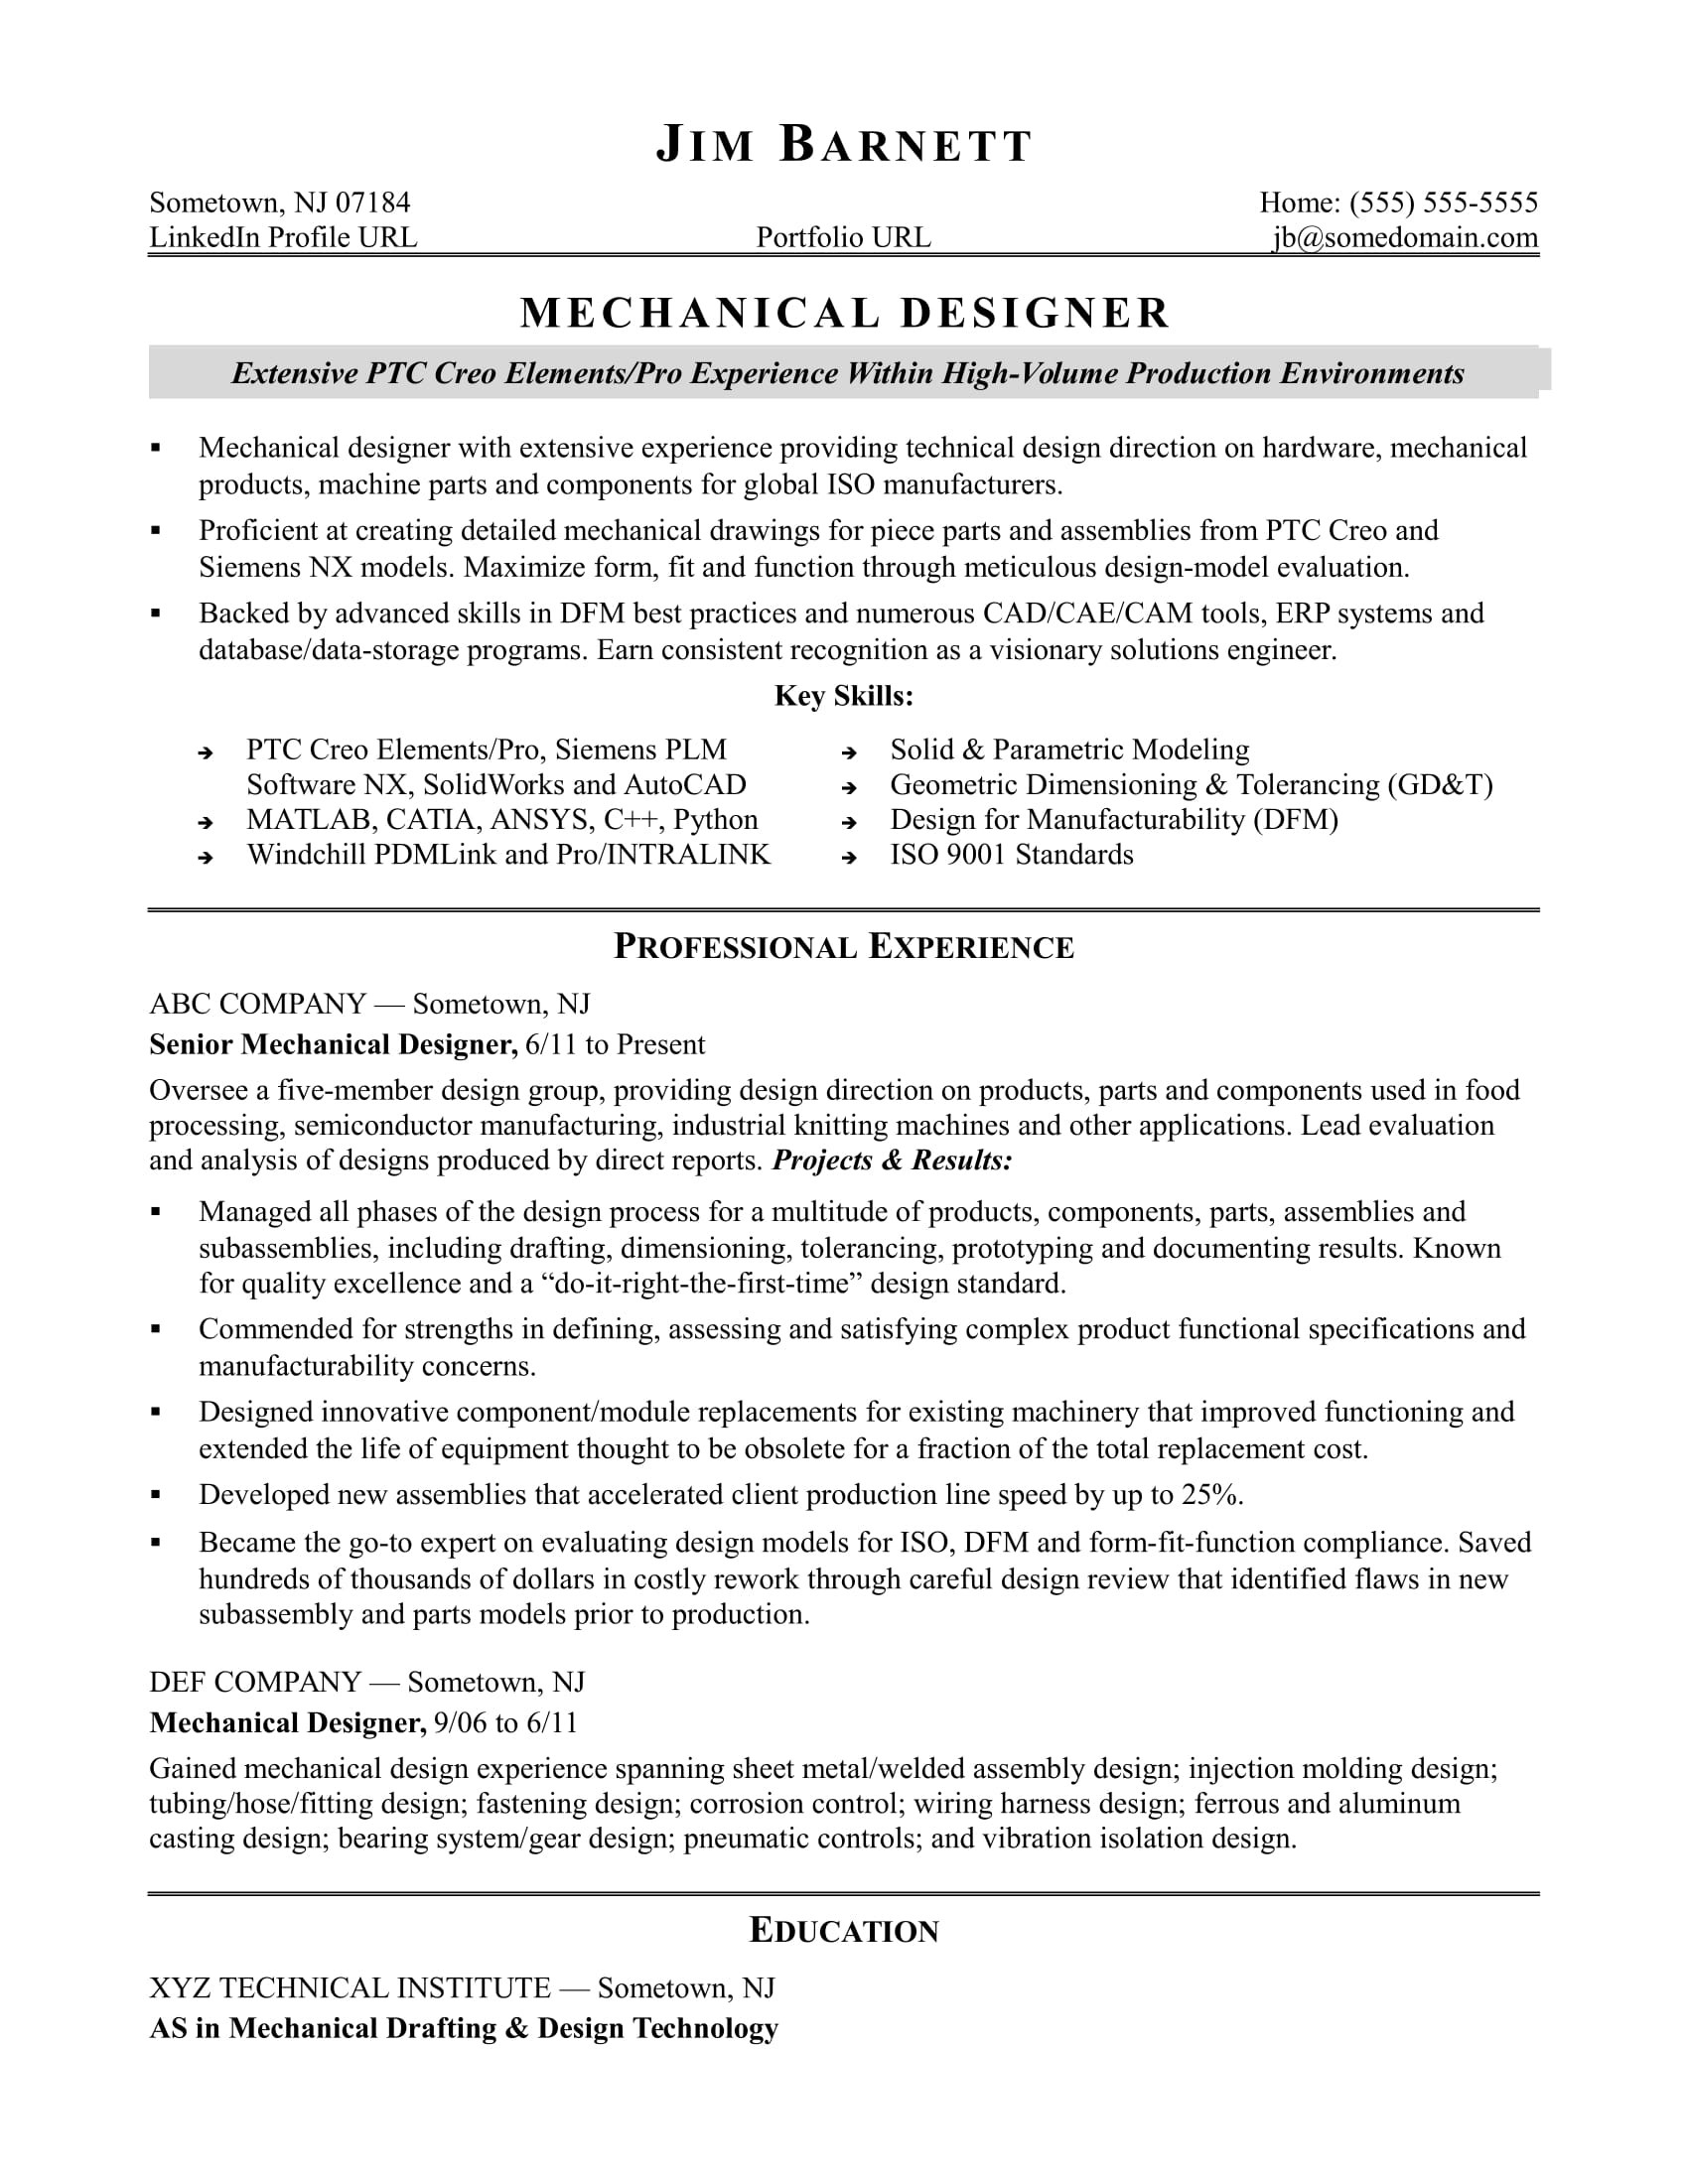 Sample Resume Template for Experienced Candidate Sample Resume for An Experienced Mechanical Designer Monster.com